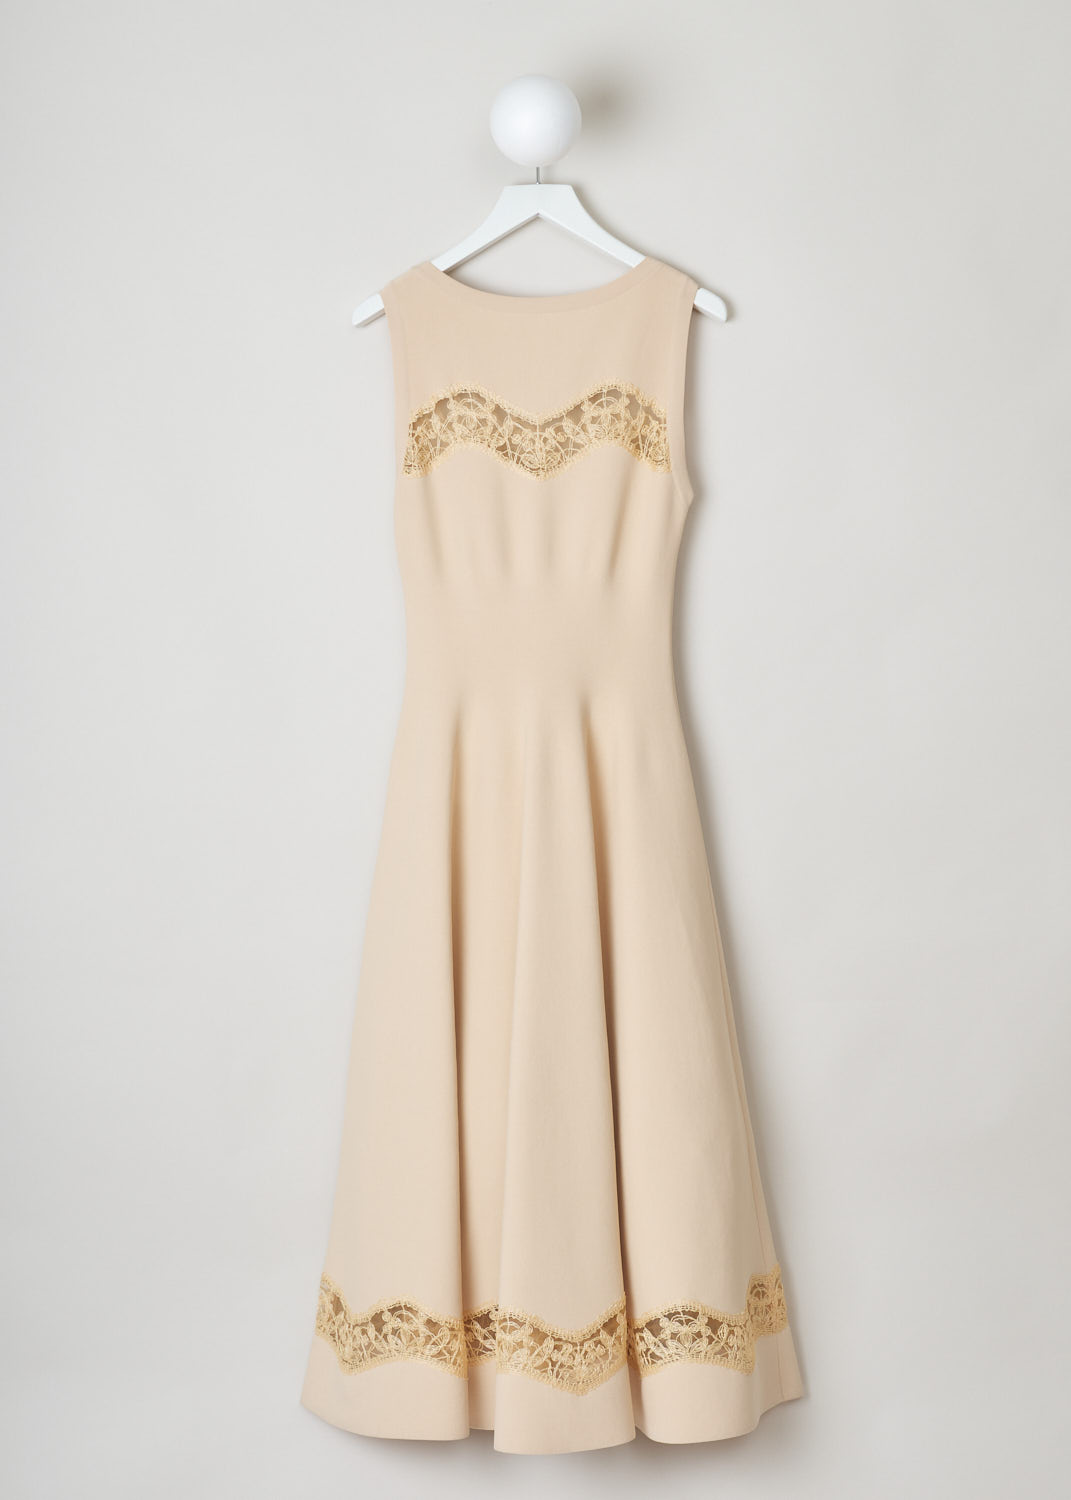 AlaÃ¯a, Max length dress with embroidered detailing, 9E9RM34LM473_robe_SM_raphia_dentelle_C120, beige, back, Max length dress featuring a fitted bodice and a skirt with flowing pleats. This model comes with round neckline and no sleeves. Lovely embroidery decorates the chest and bottom of the dress. Fastening option on this model can be found on the left side of the dress.  